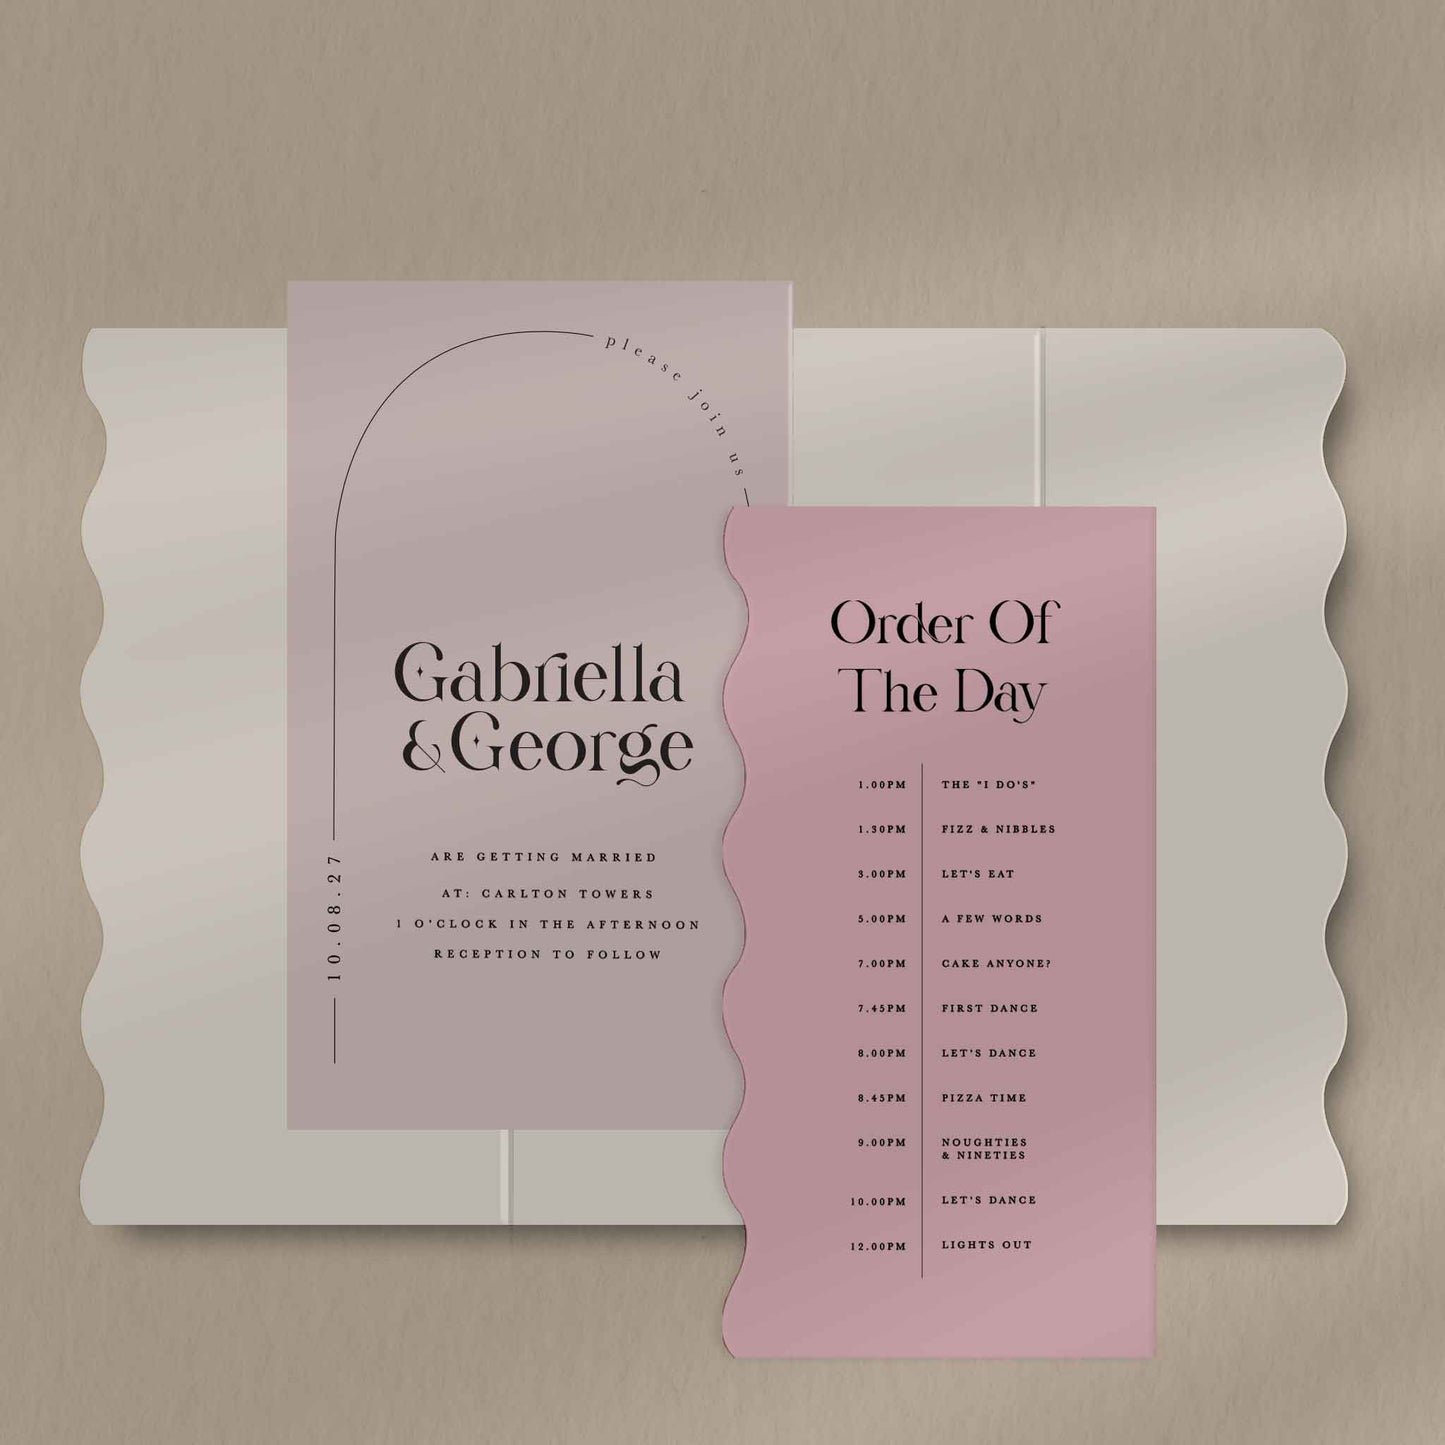 Gabriella Scallop Envelope Invite  Ivy and Gold Wedding Stationery   